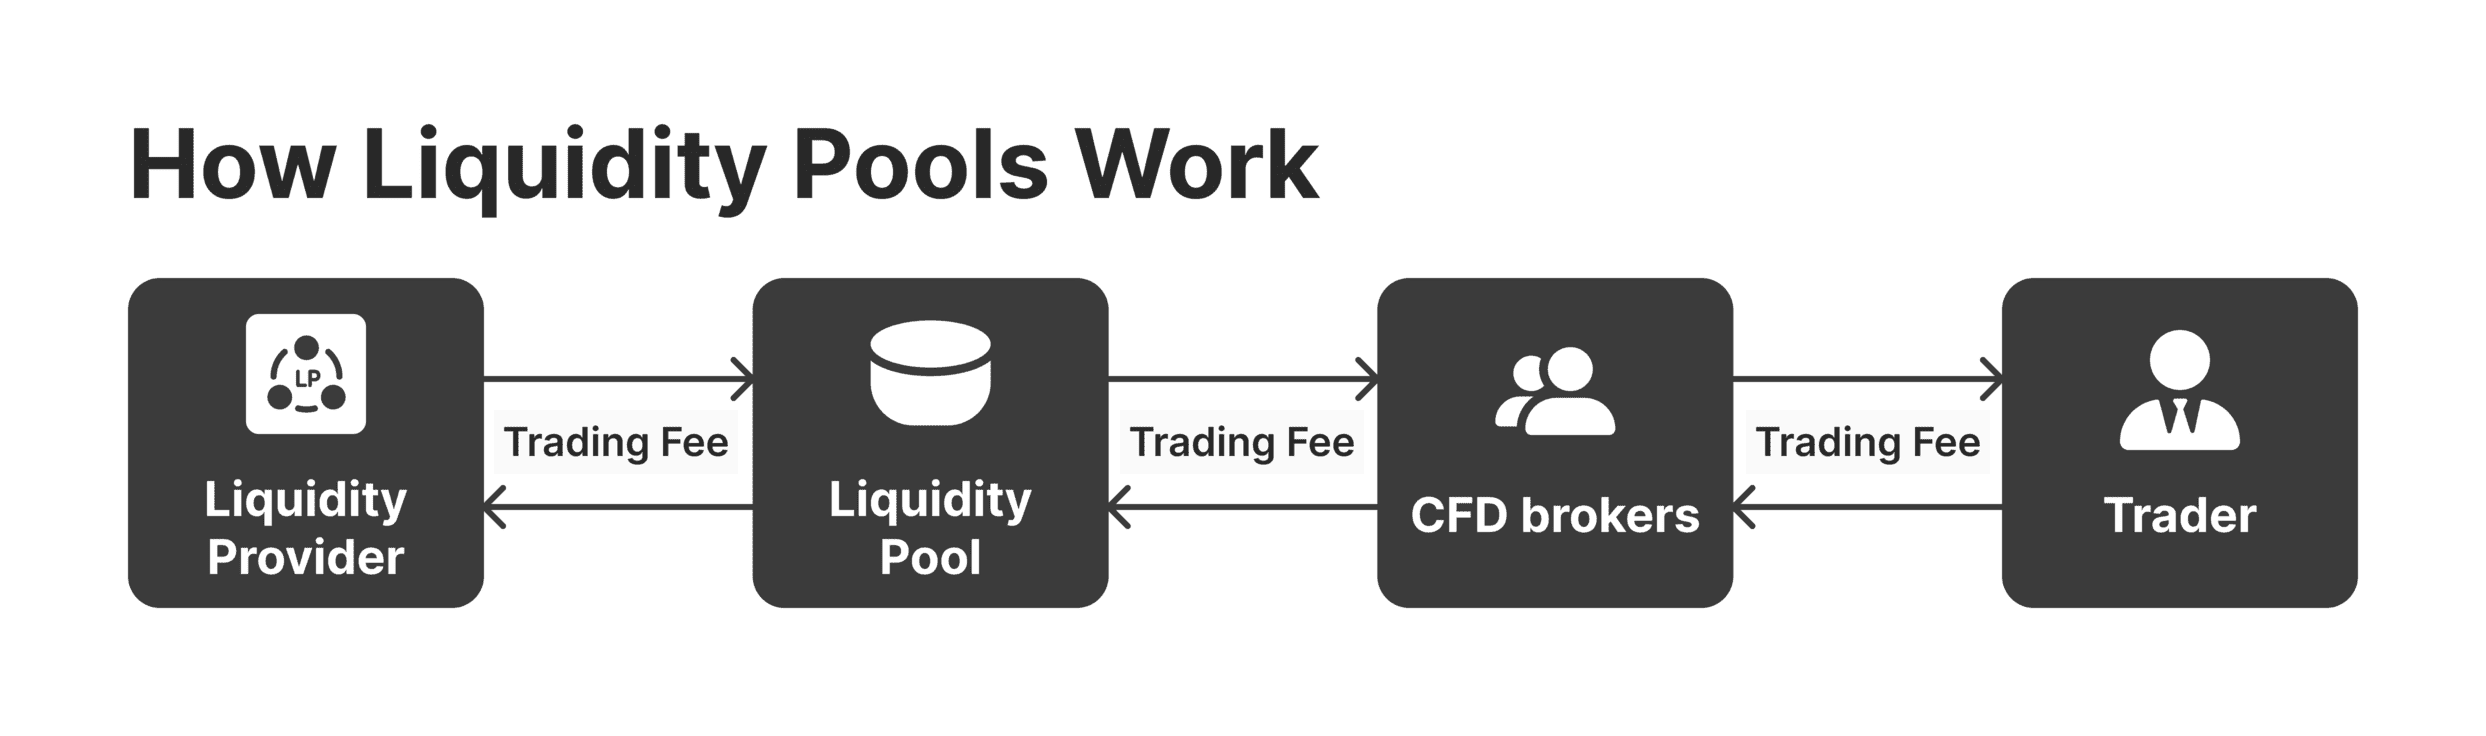 How Liquidity Works with CFDs